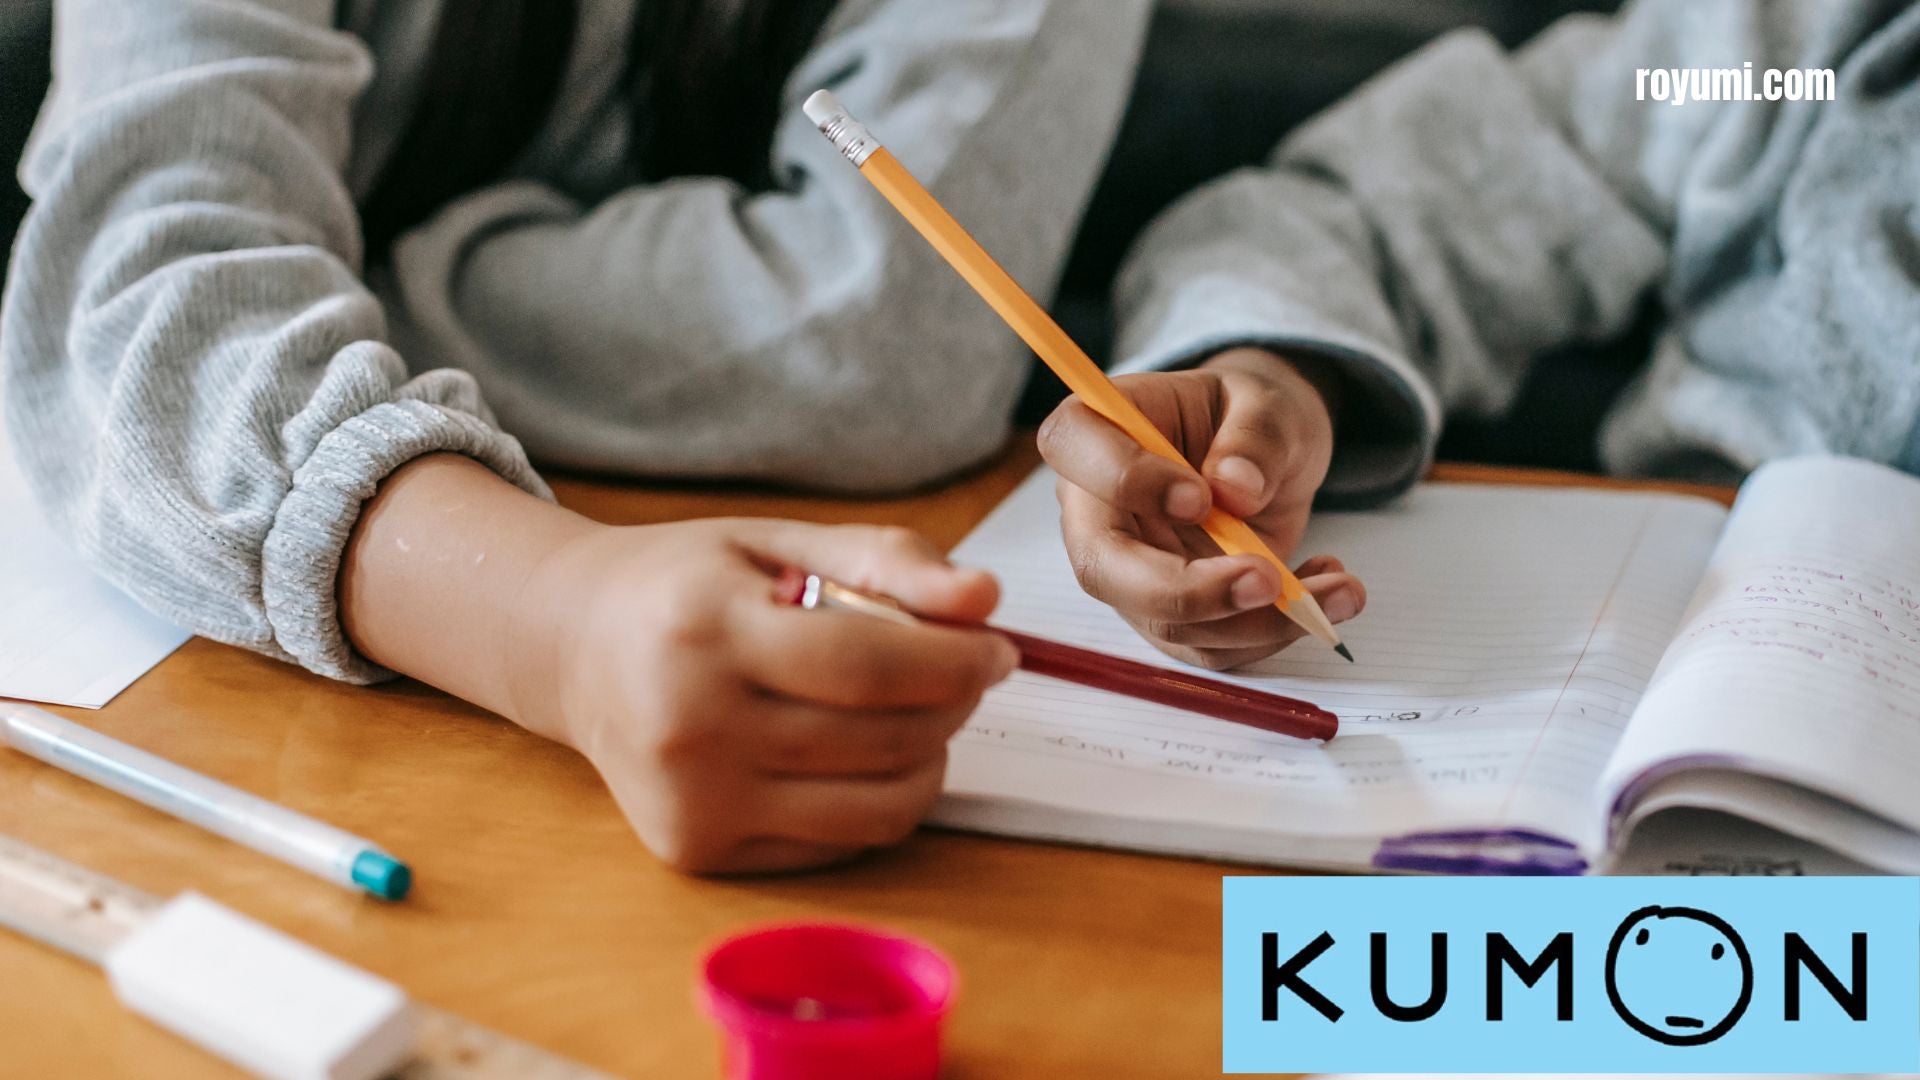 Kumon’s Limitations: Why It May Not Be the Right Choice for Everyone